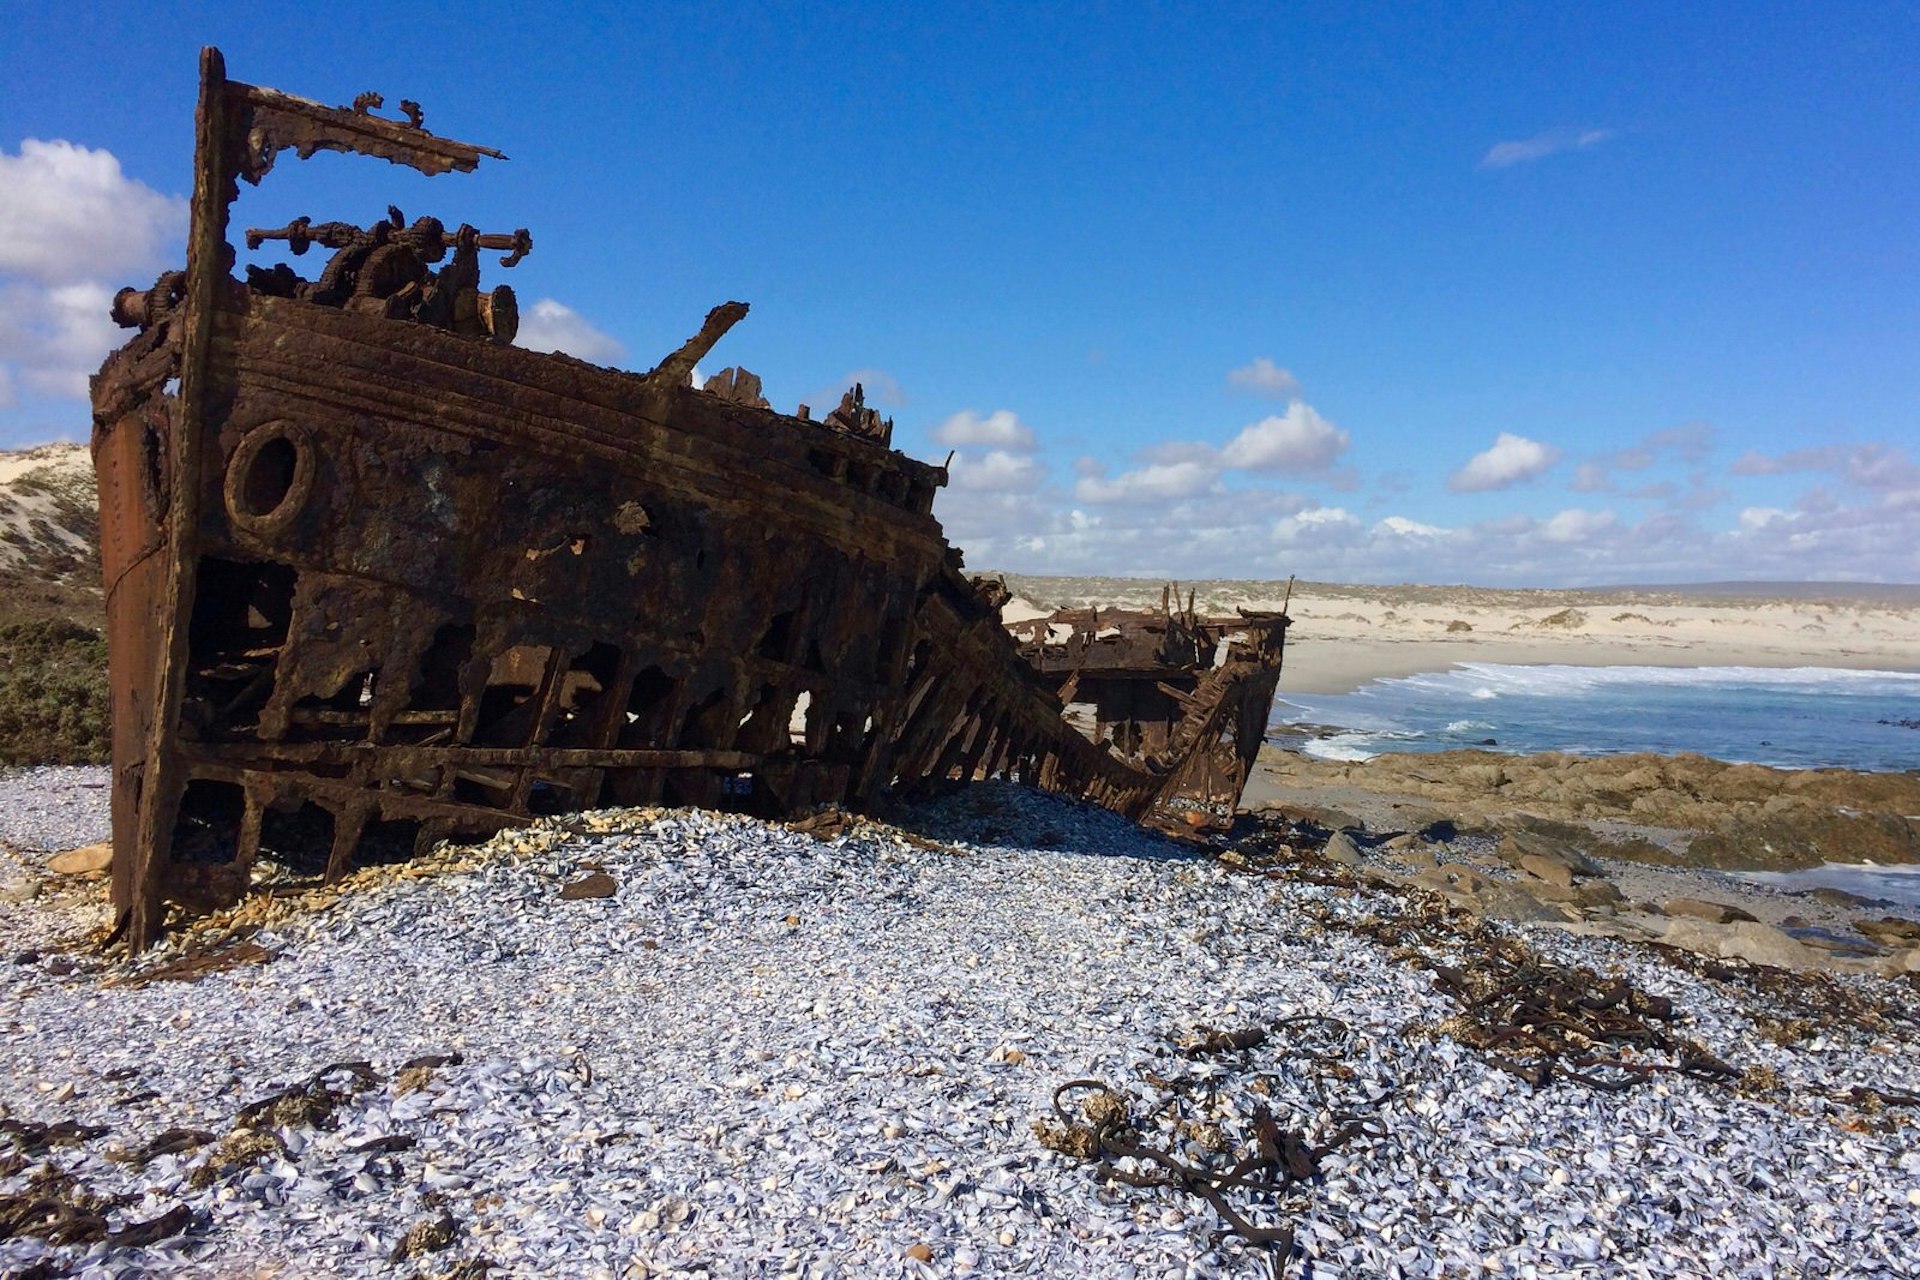 A huge rusty shipwreck sits on a bed of shells, with a beach in the distance